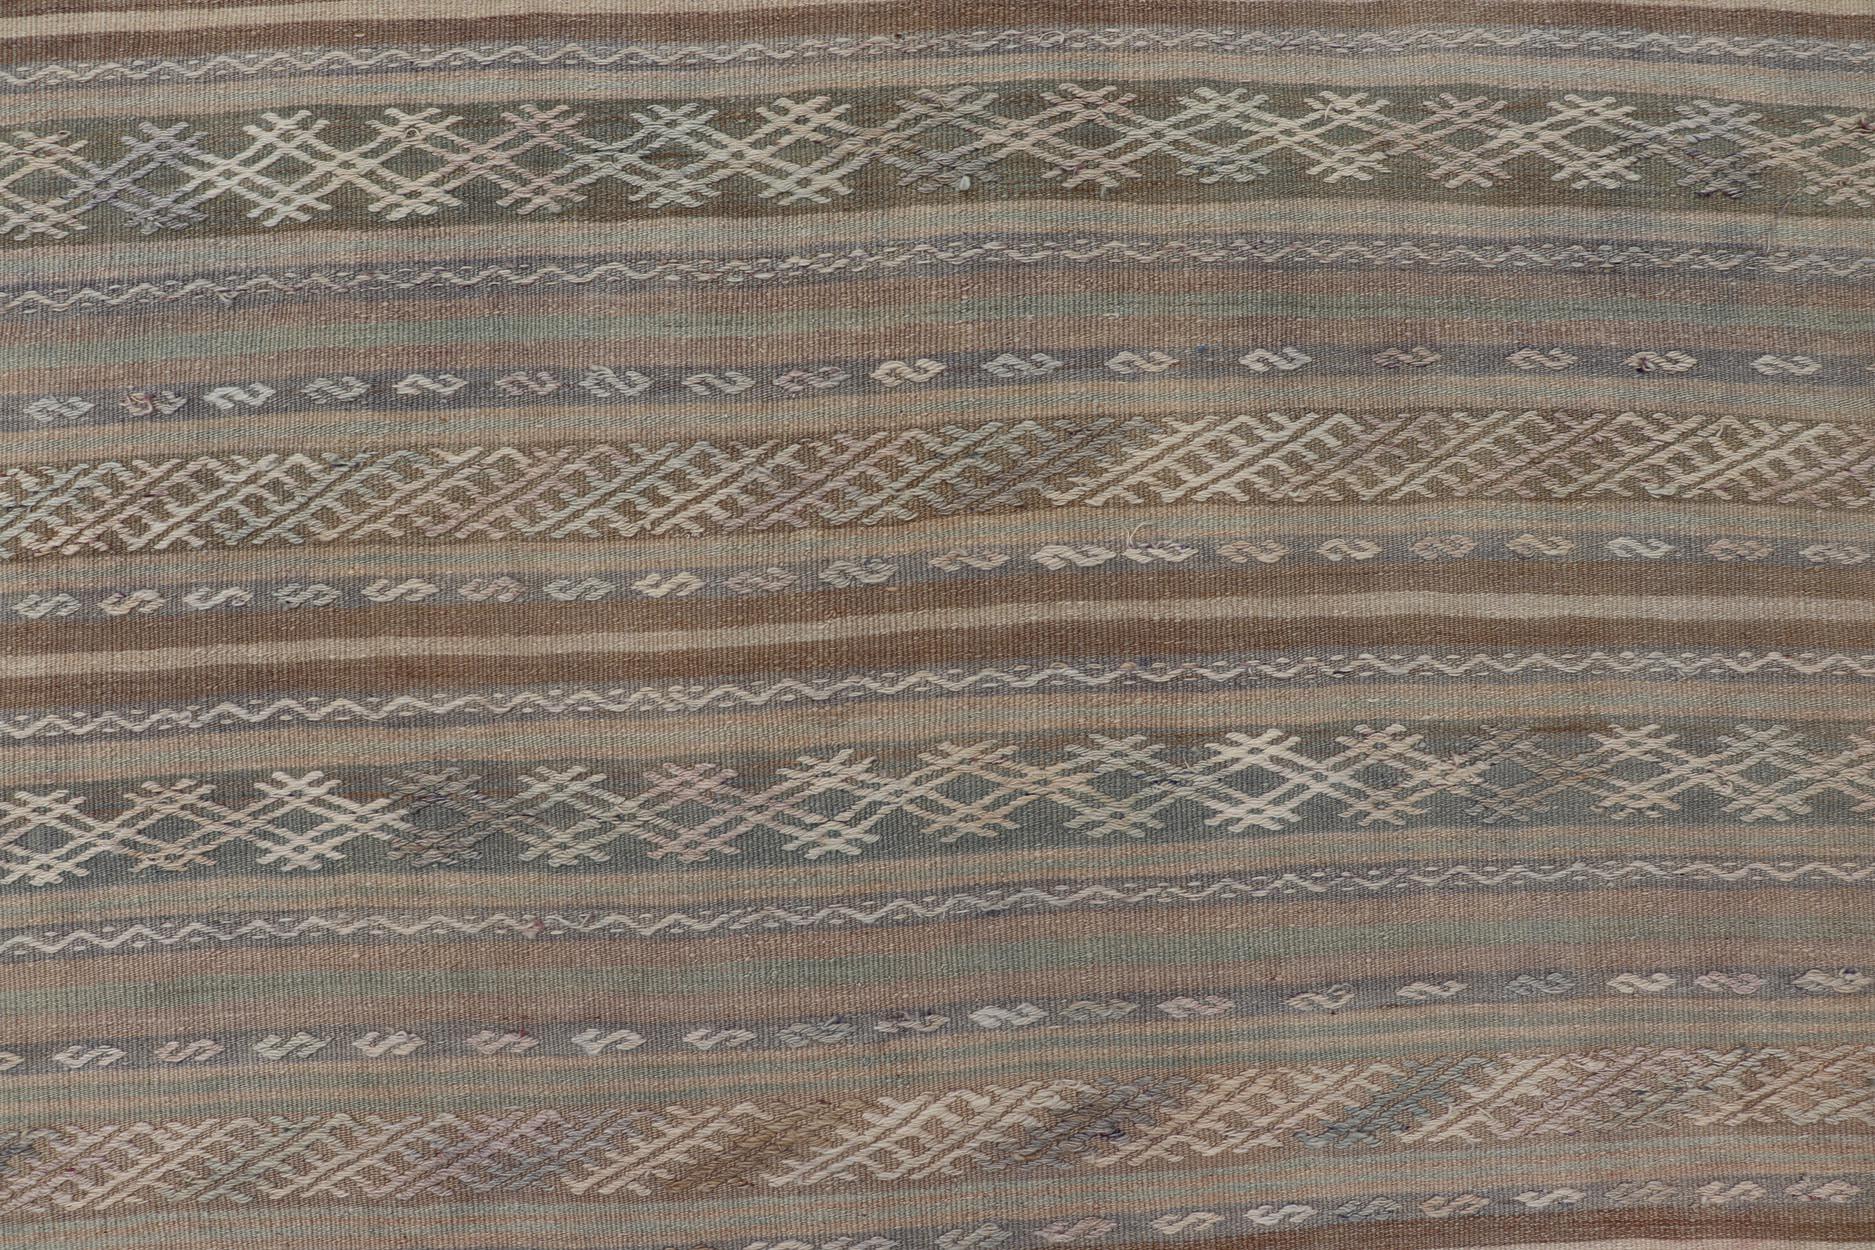 Vintage Turkish Flat-Weave Kilim with Embroideries in Muted Tones and Stripes 2